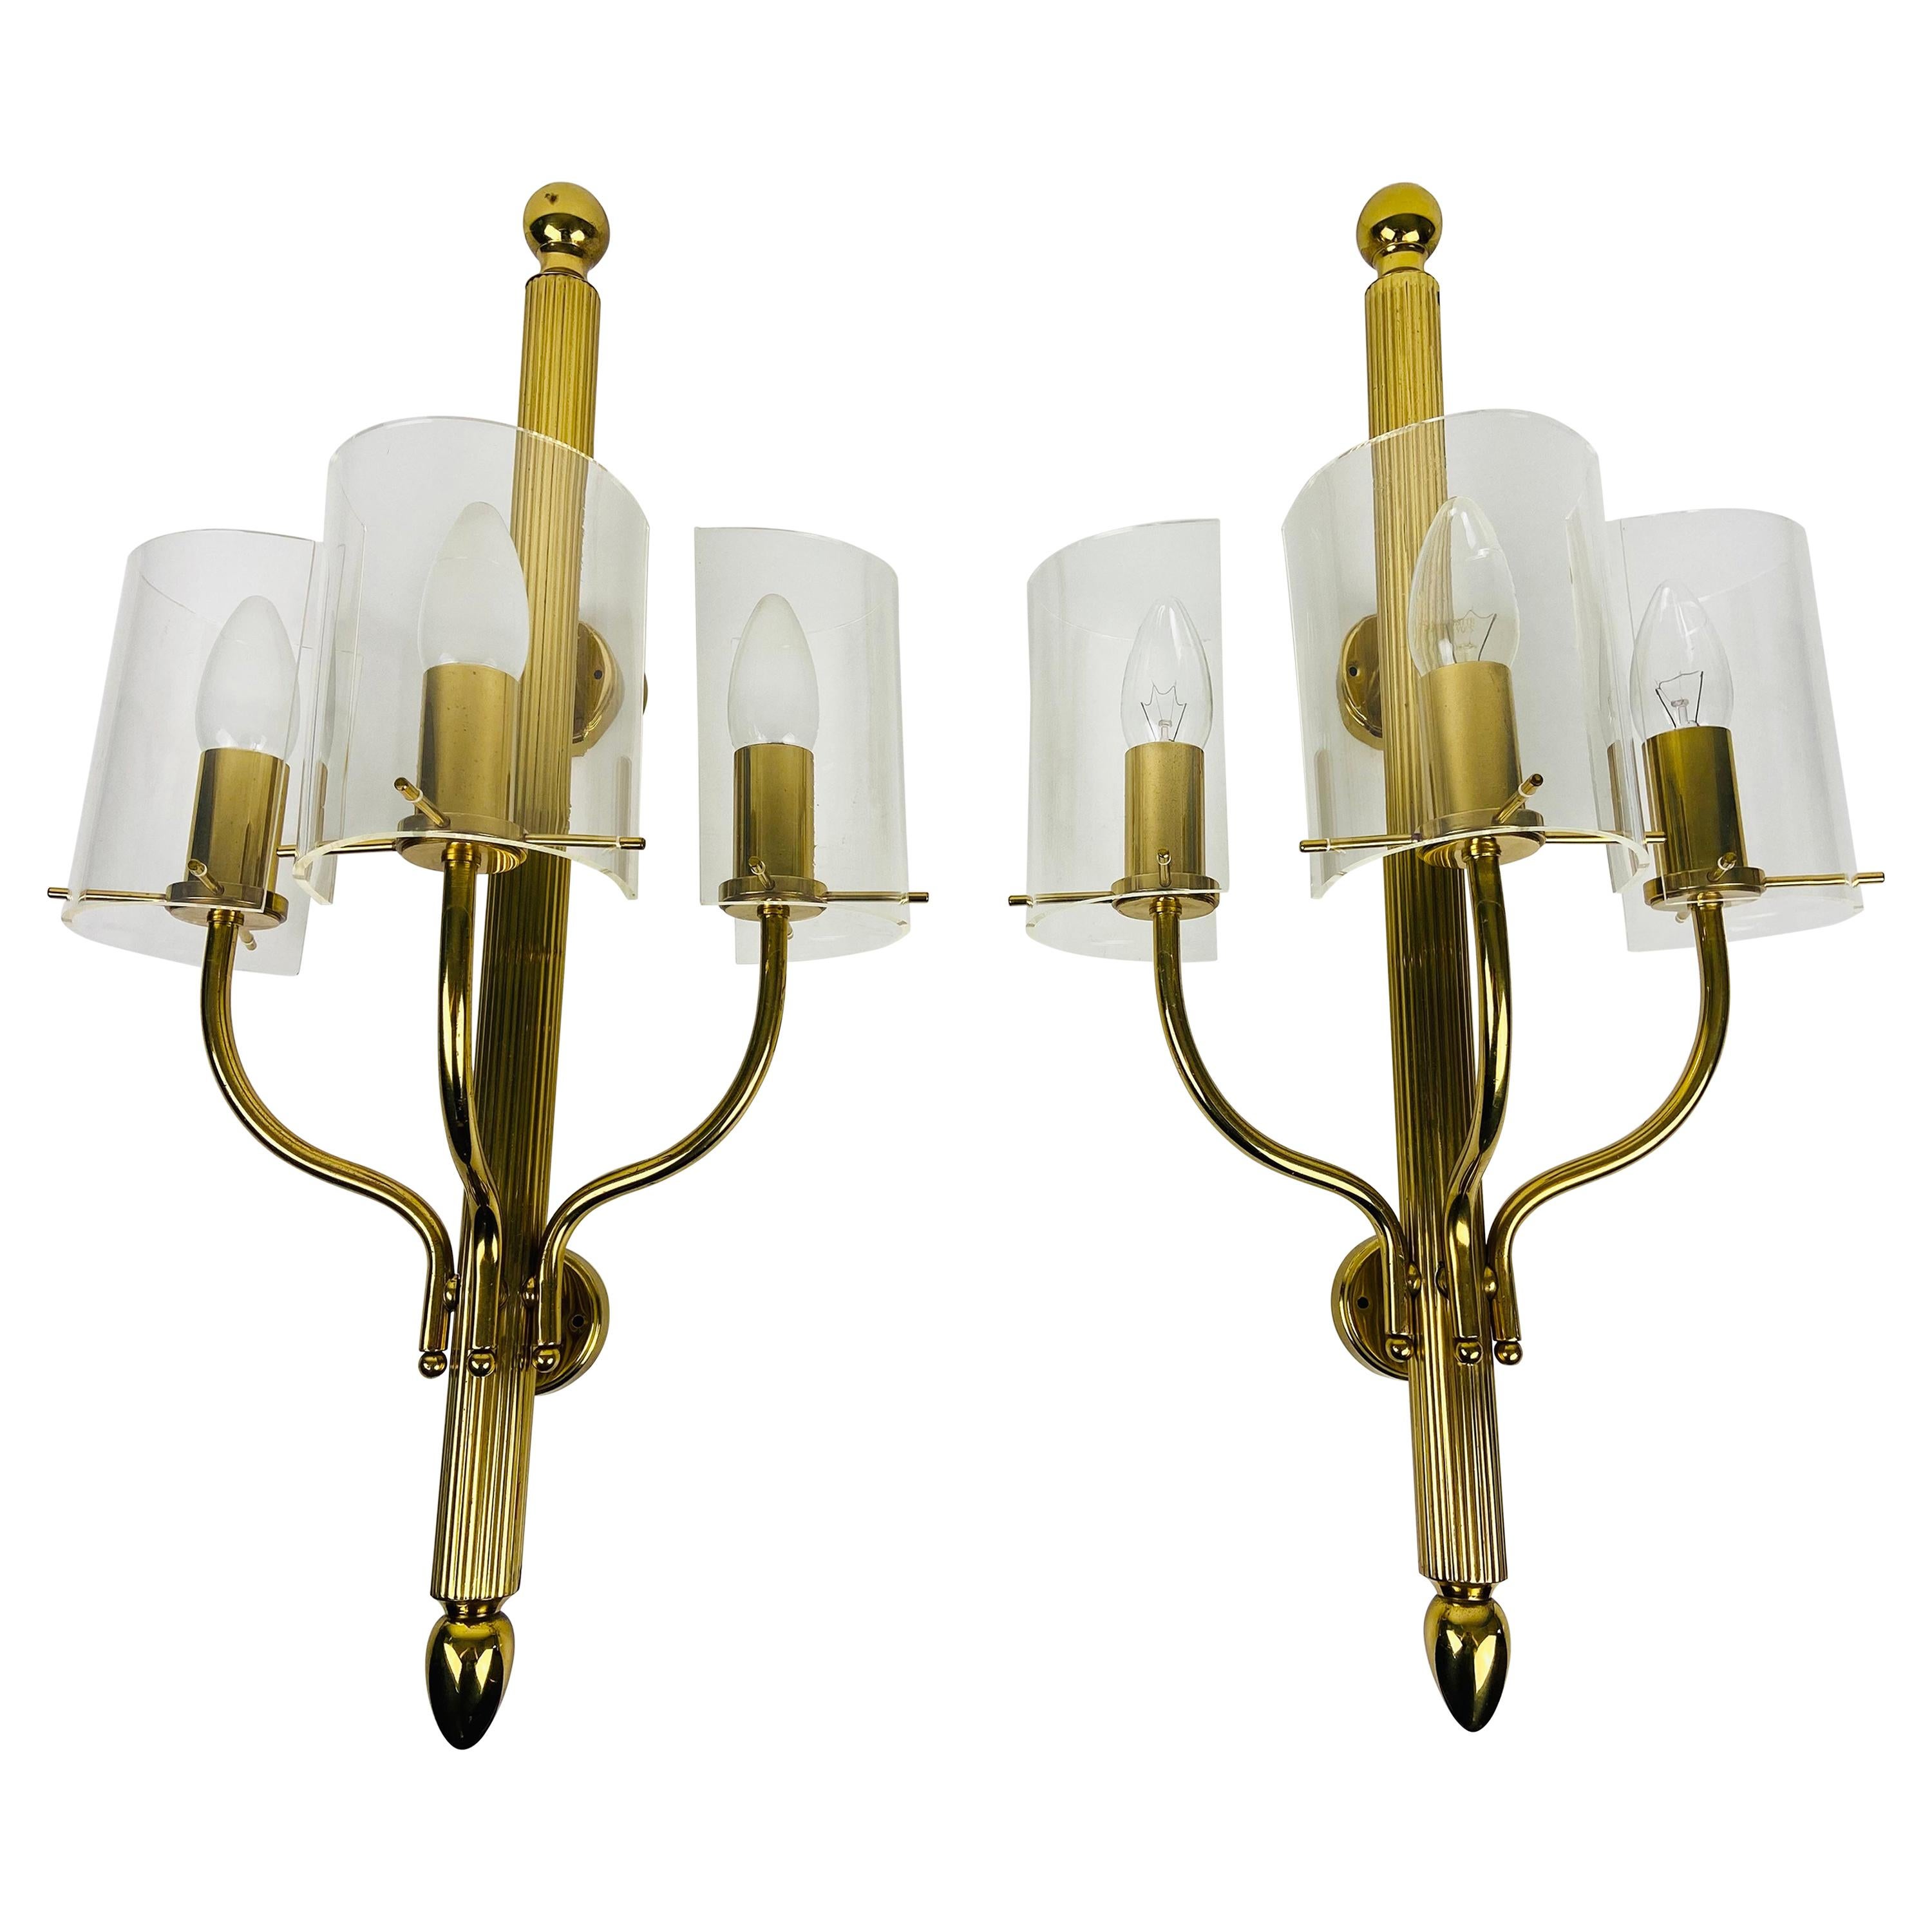 Huge Pair of Mid-Century Modern Brass and Perspex Cinema Wall Lamps, 1950s For Sale